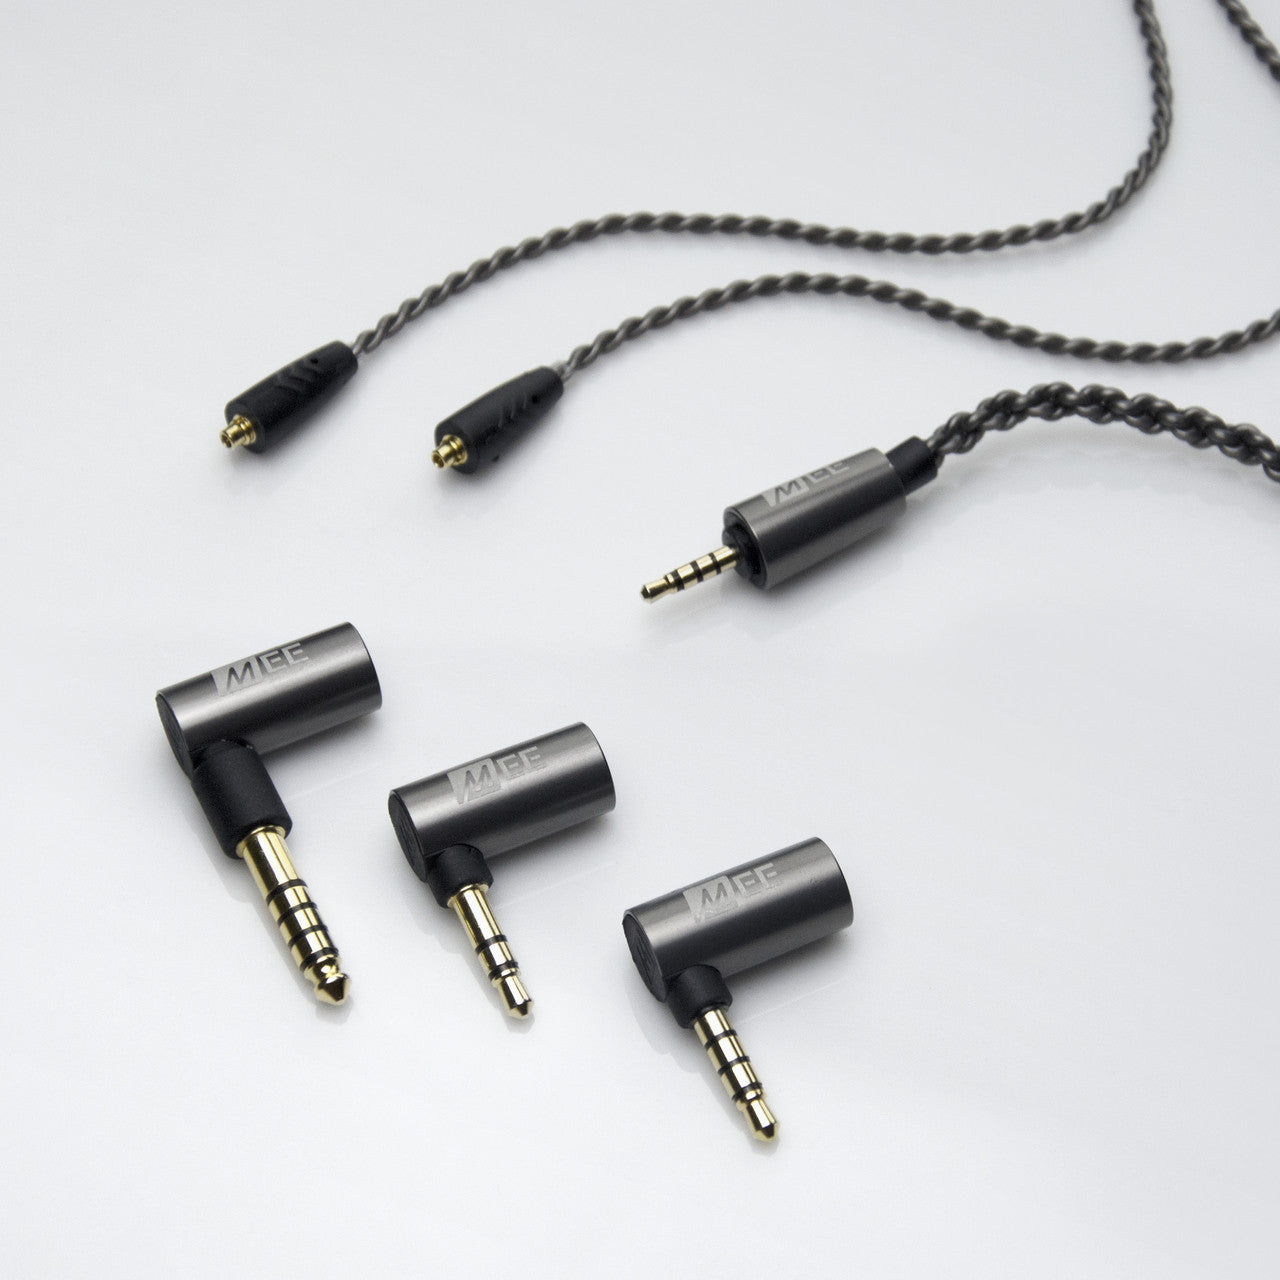 Image of Universal MMCX Balanced Audio Cable with Adapter Set.